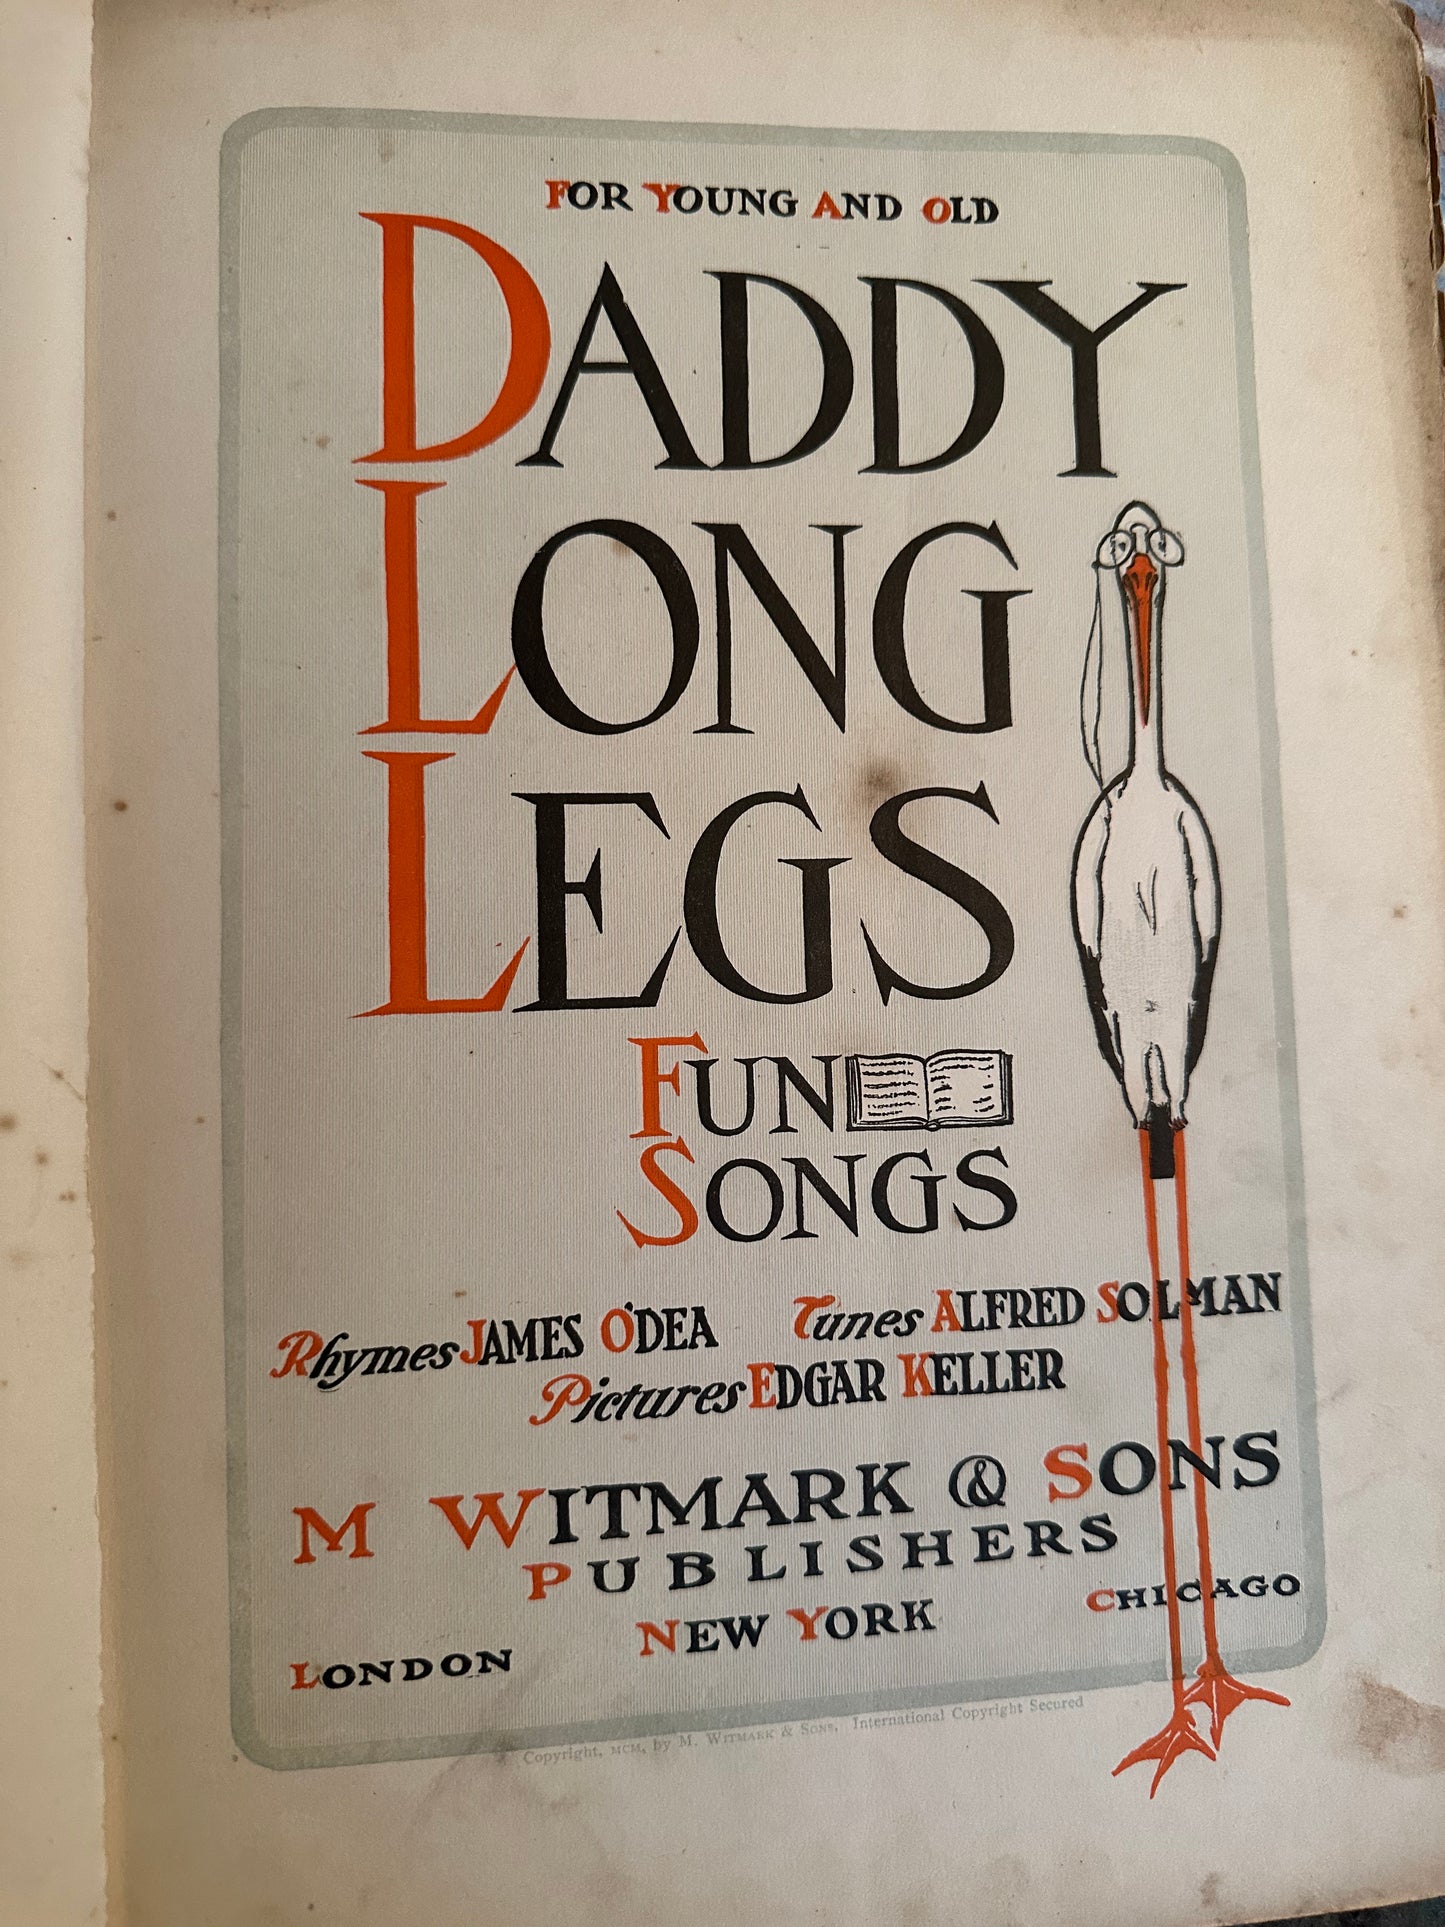 1928 Daddy Long Legs Fun Songs(With Pictures) James O’Dea(Alfred Solman) Witmark & Sons